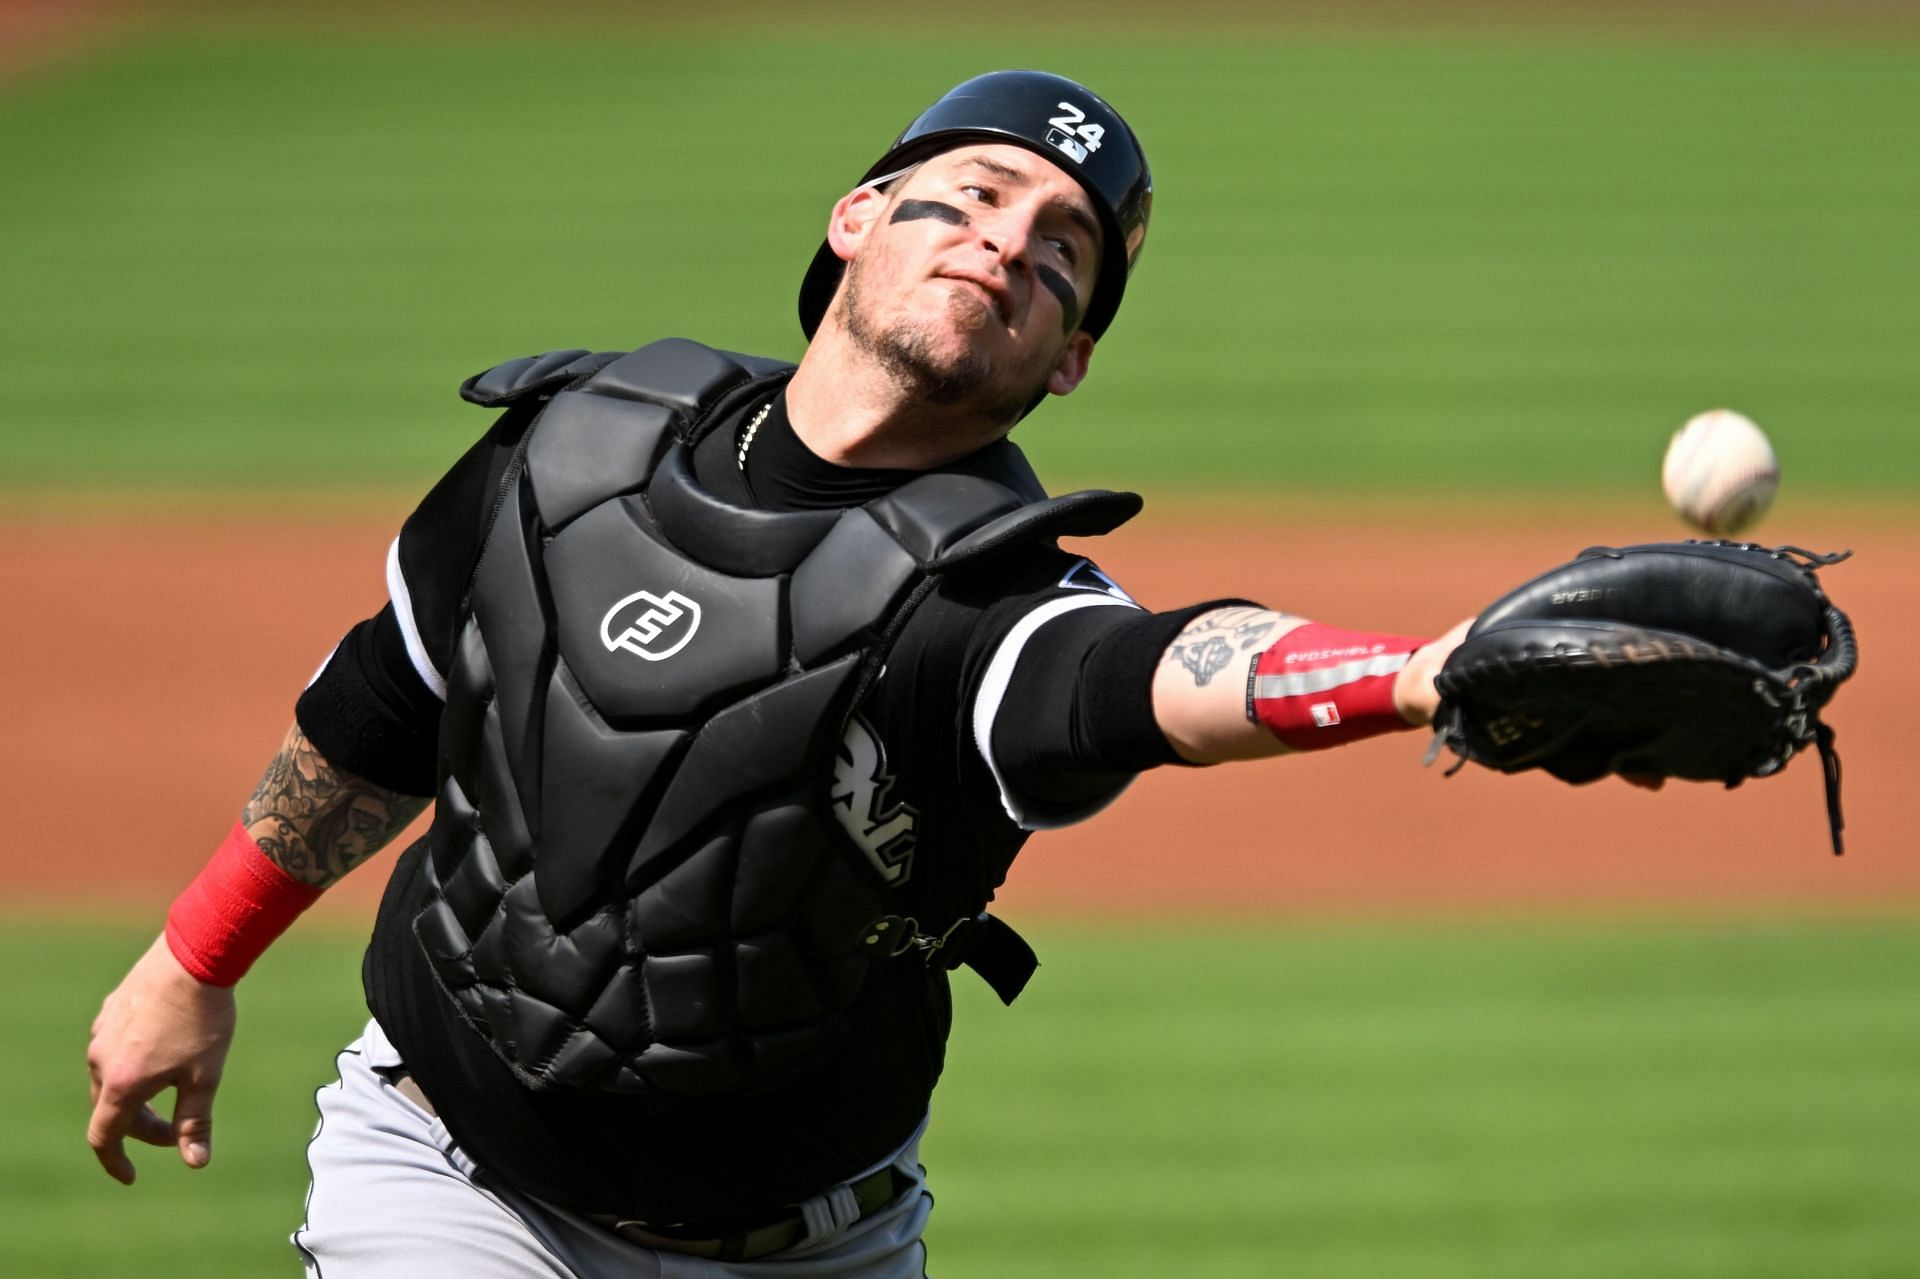 The Chicago White Sox have struggled